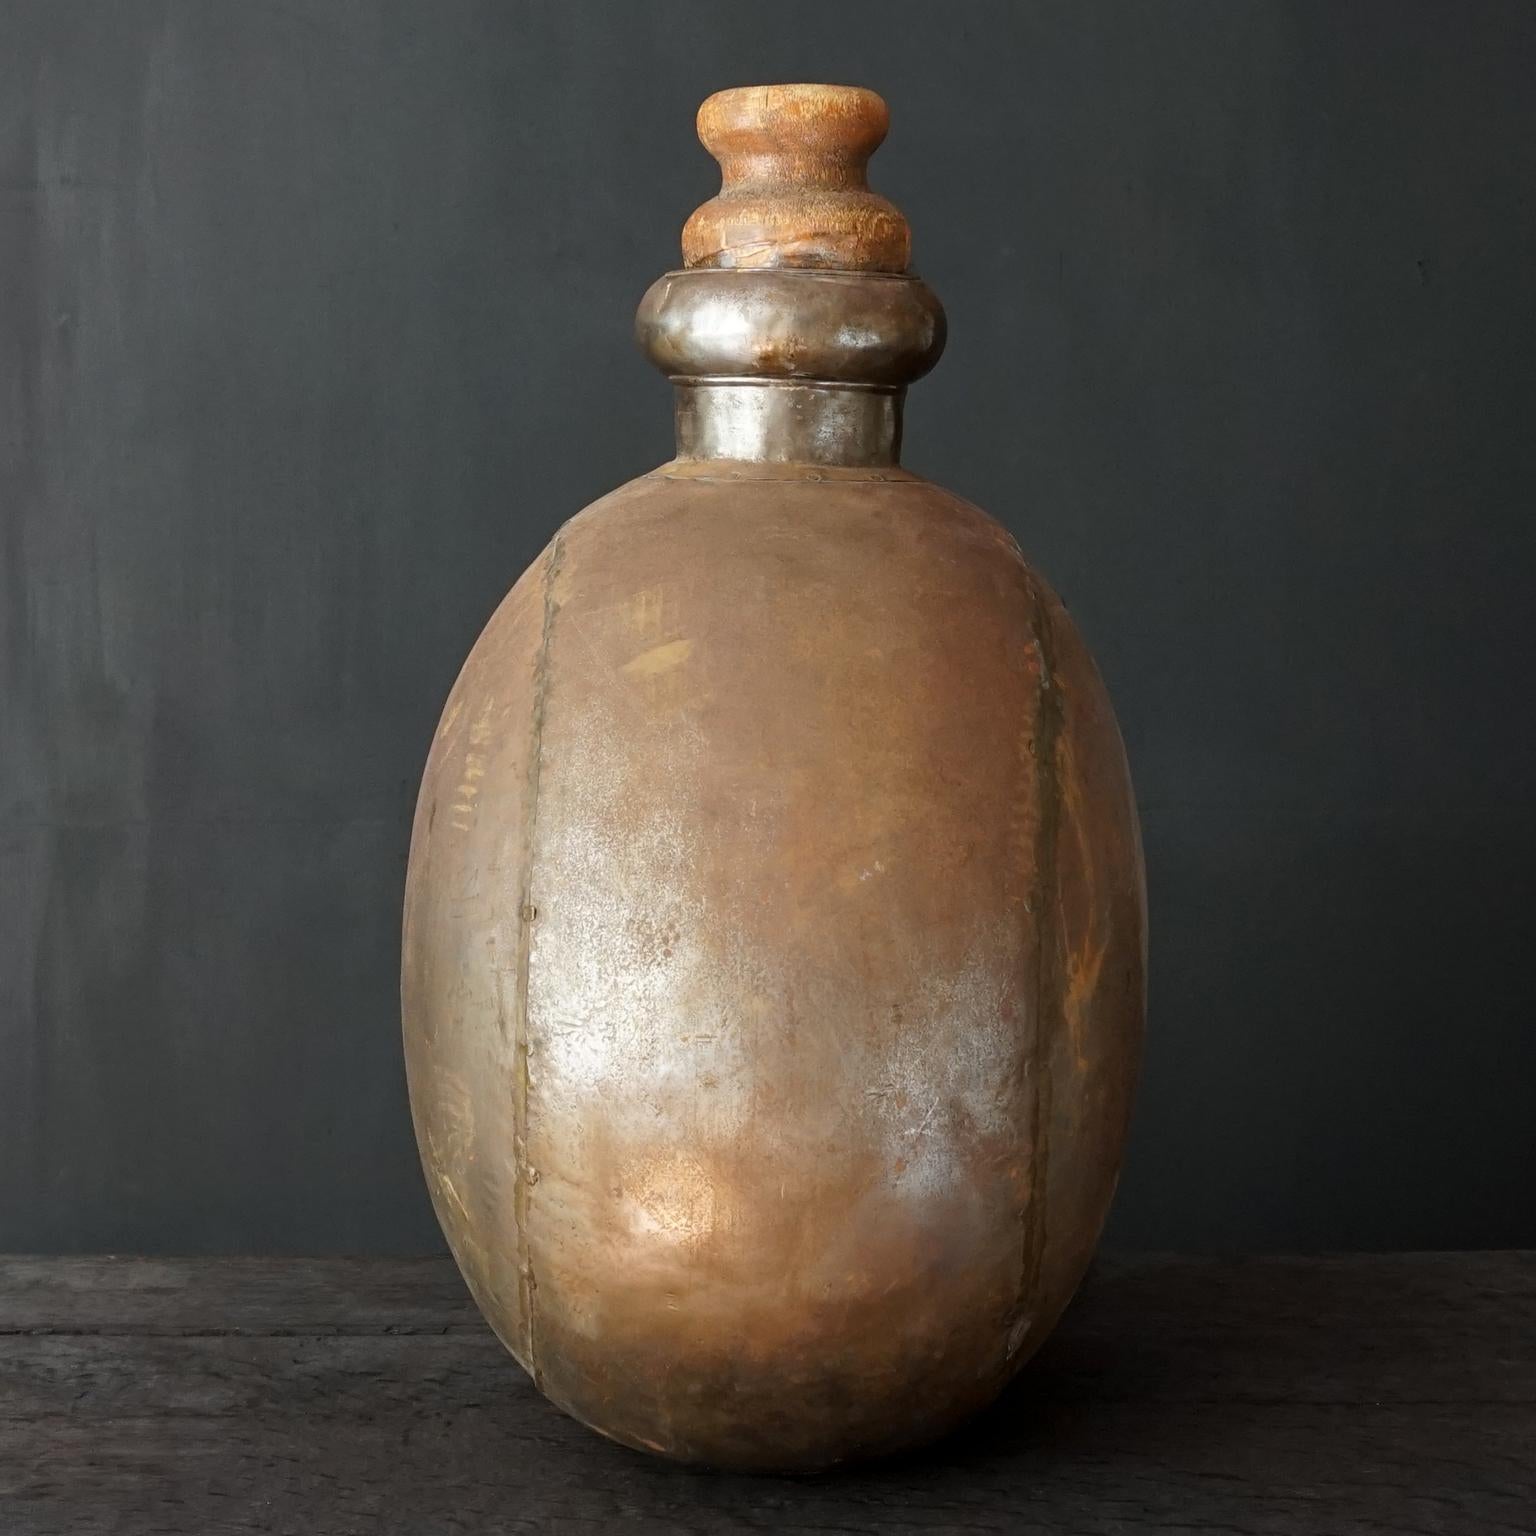 1950s Indian Hand-Hammered Large Metal Water Jug or Bottle with Wooden Cork For Sale 8